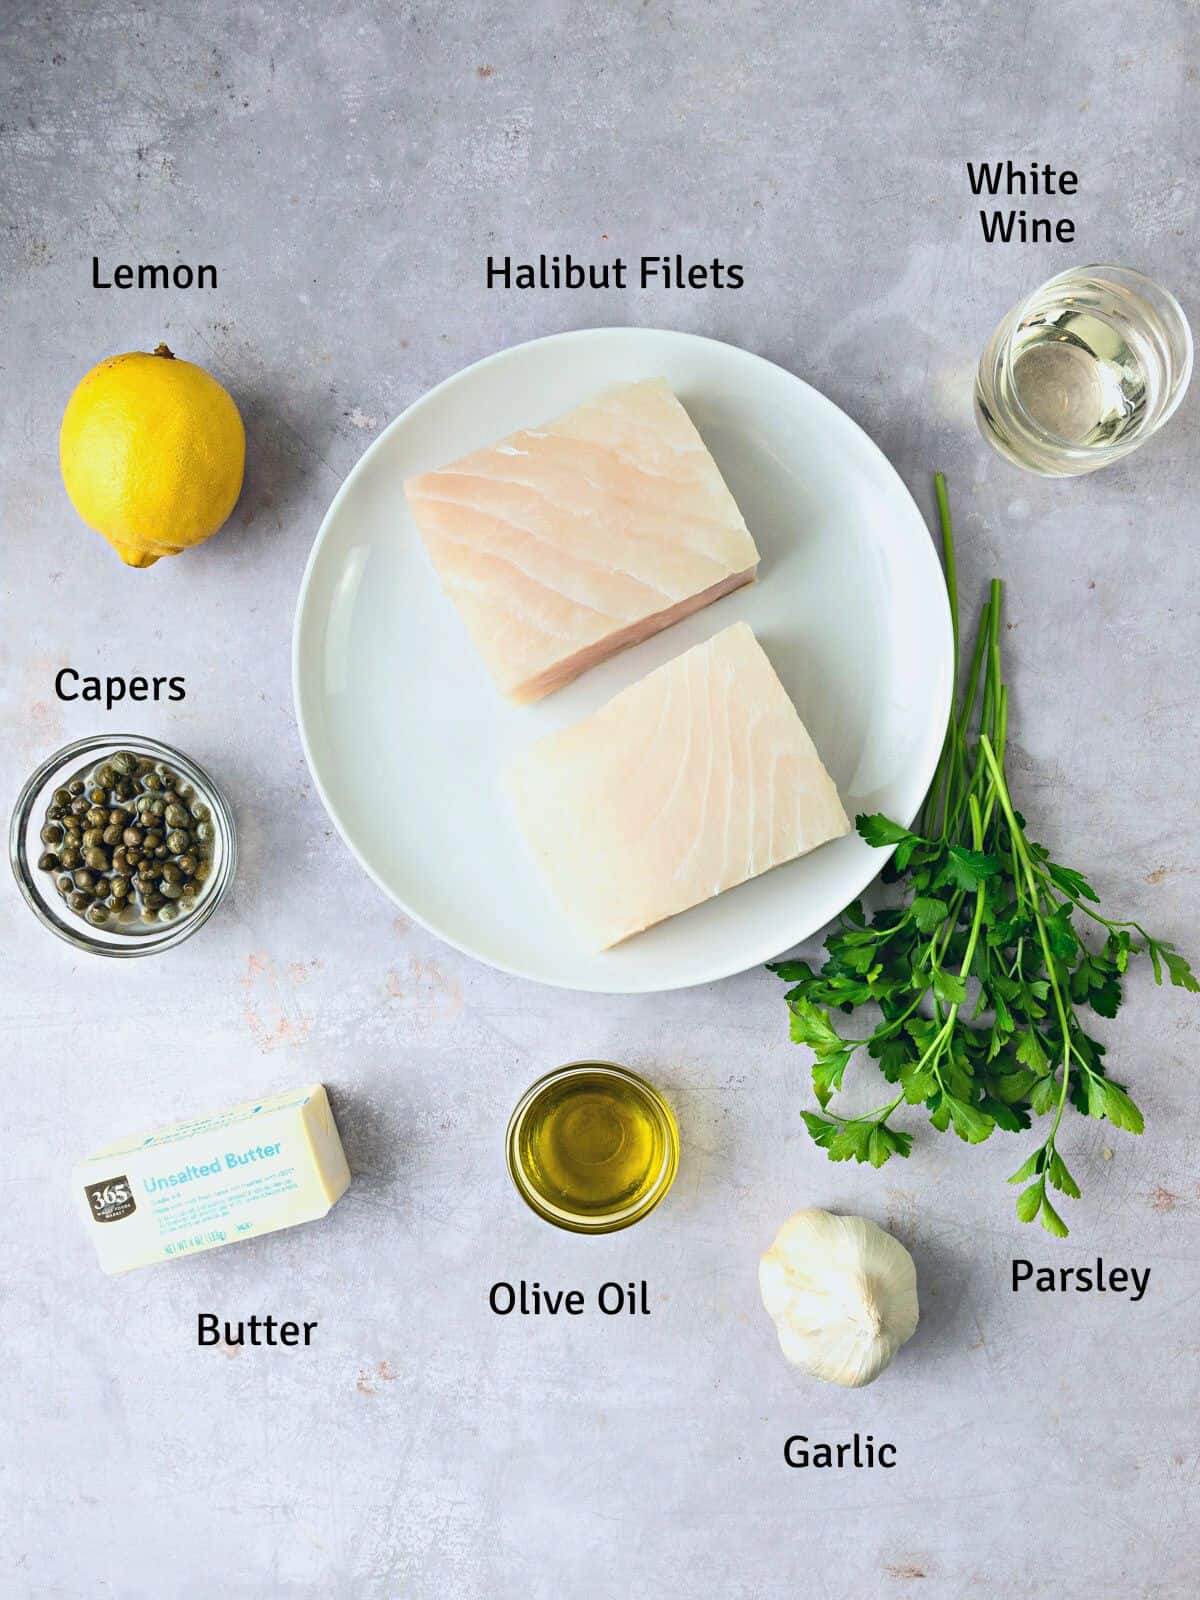 Ingredients for halibut piccata, including lemon, white wine and capers.